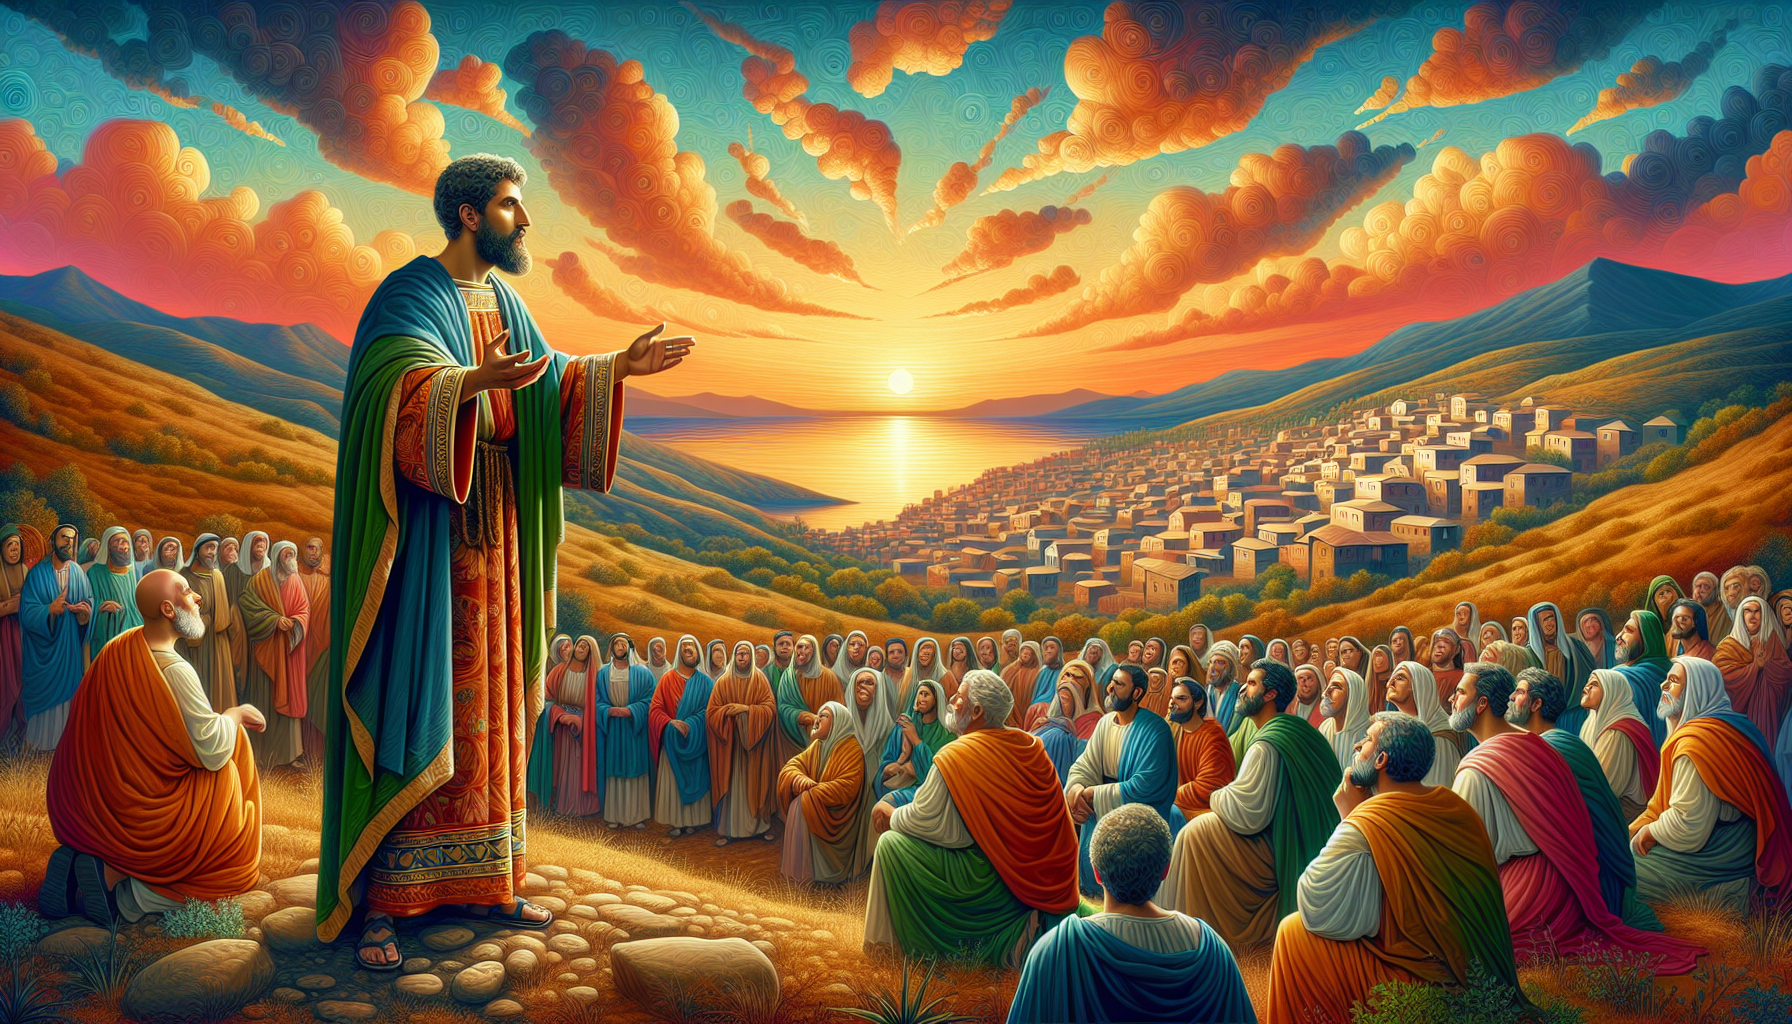 An artistic representation of San Simon Apostol, dressed in traditional biblical attire, standing on a hill with a scenic panoramic view of a small ancient village in the background, under a radiant s